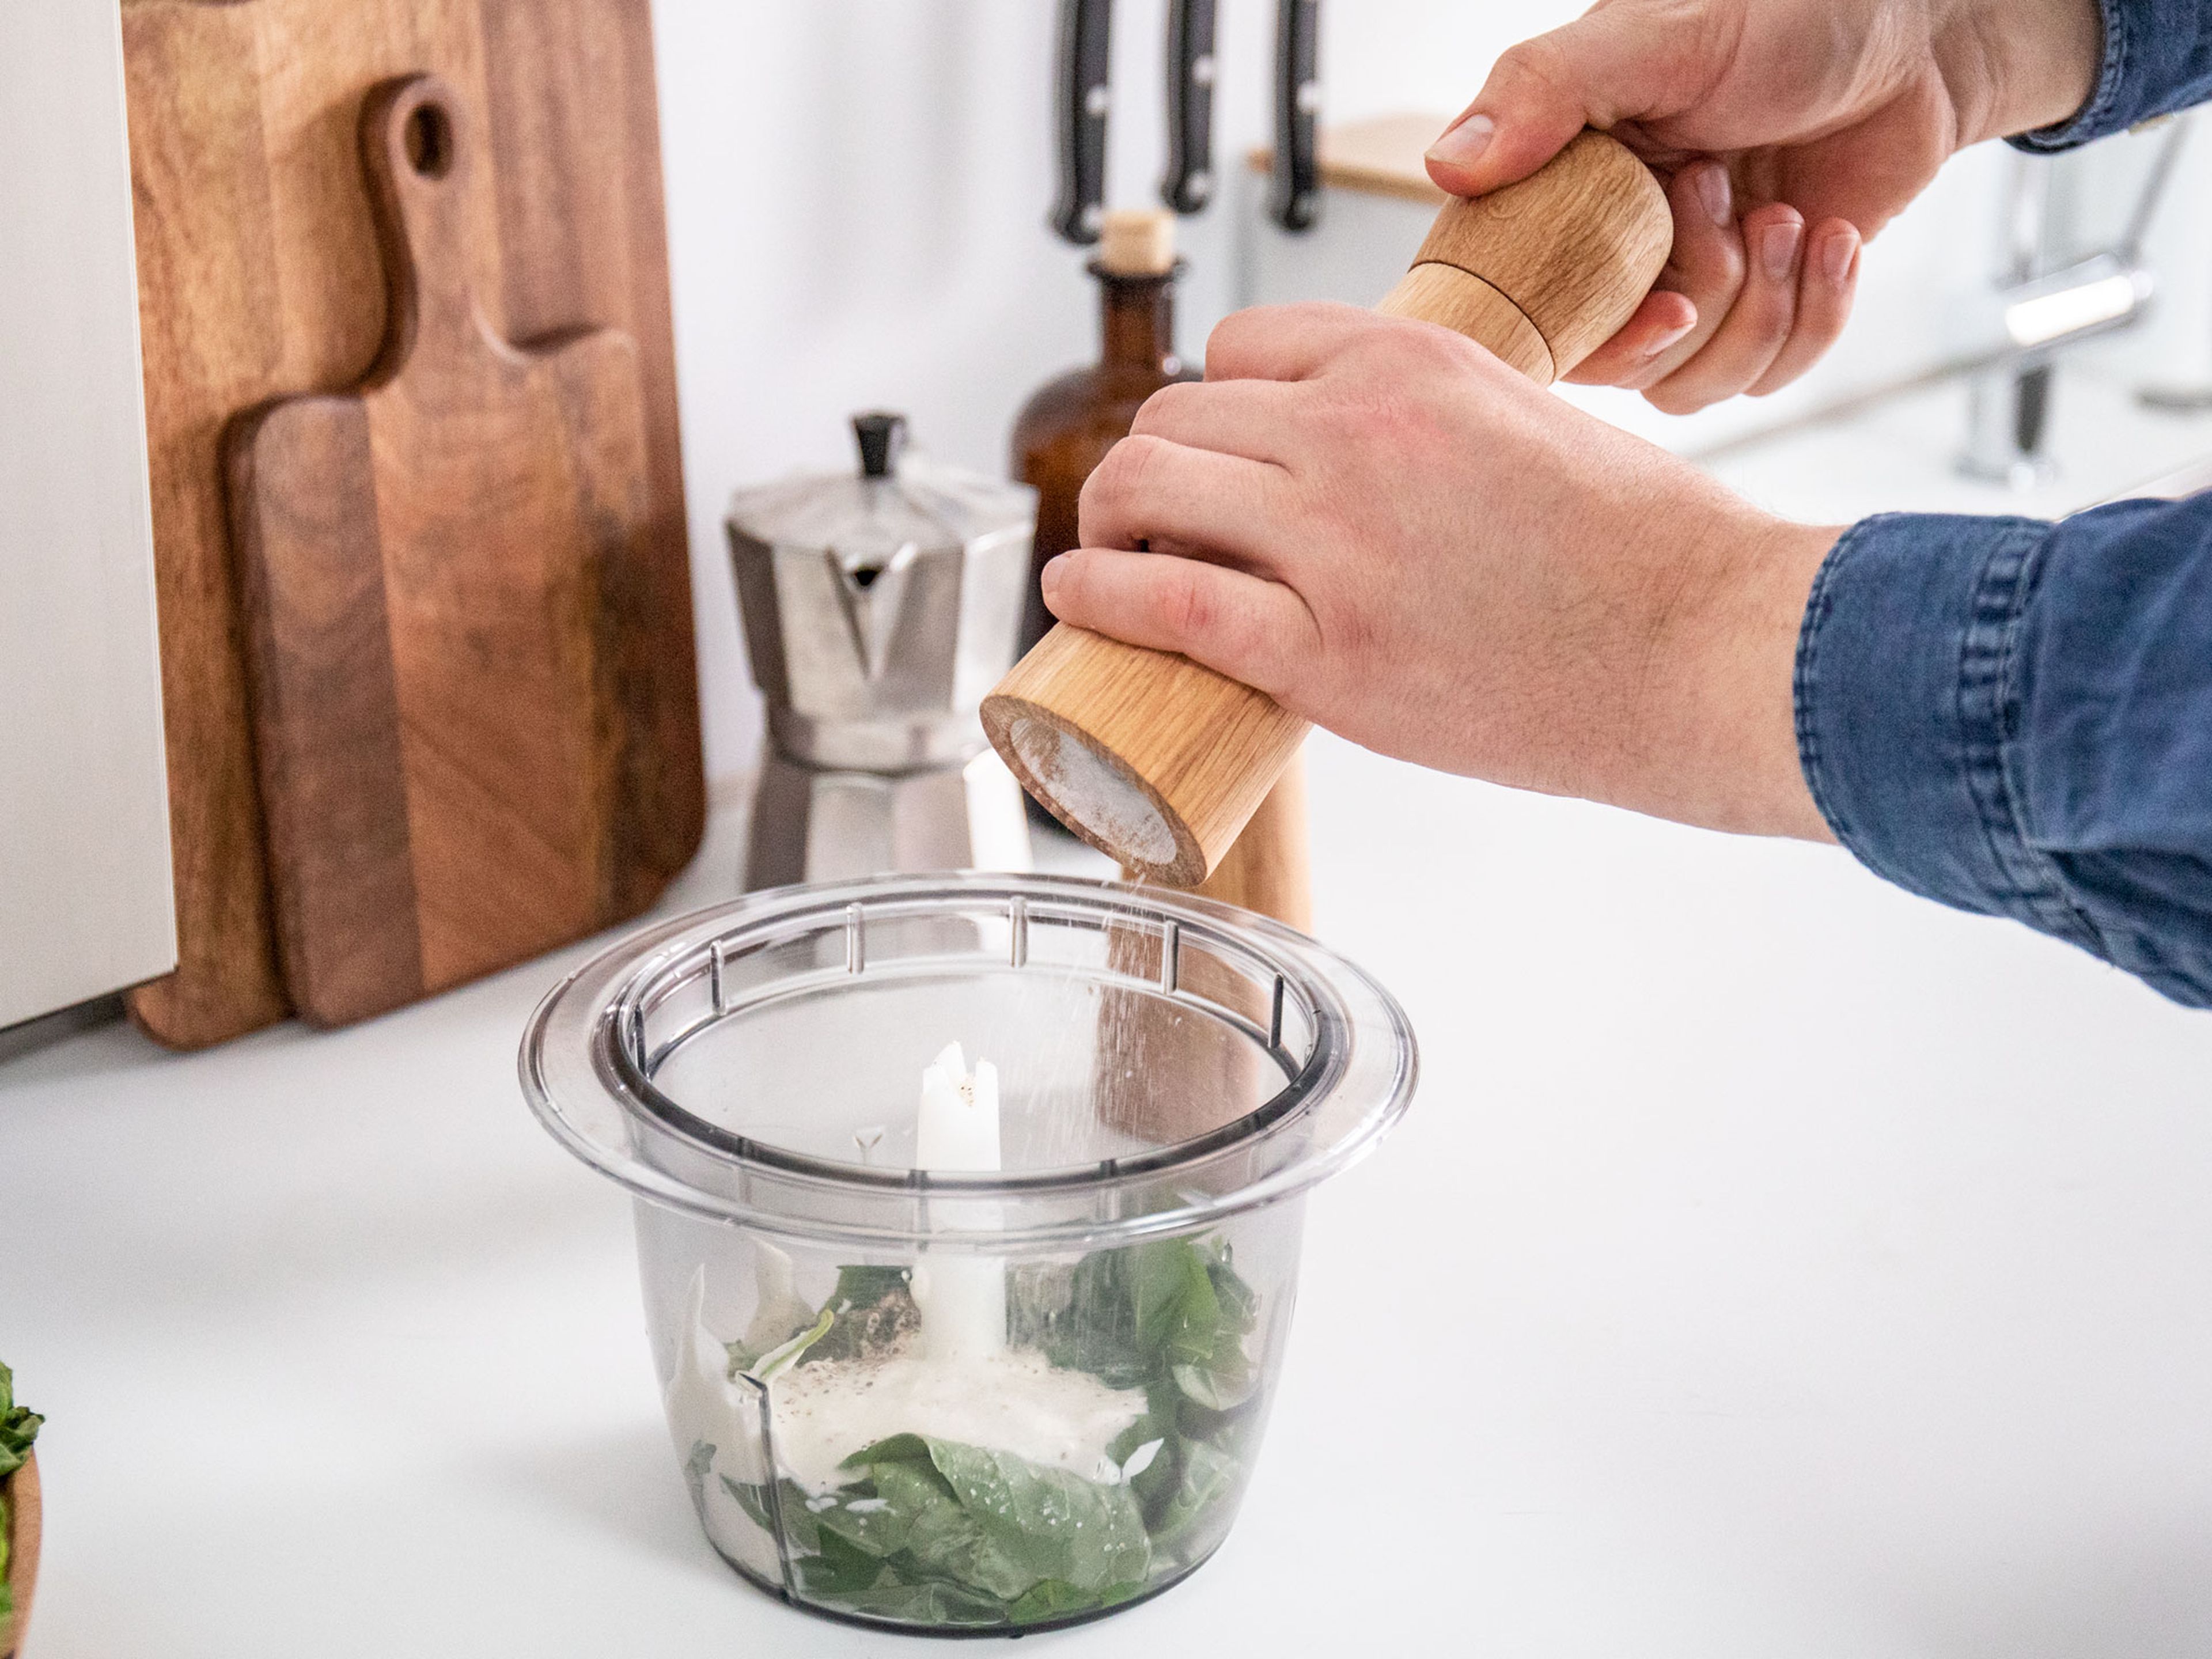 To make the basil yogurt, add some basil, Greek yogurt, one third of the garlic, and lemon juice to a food processor. Season with salt and pepper, then process to a smooth green sauce. Season to taste and keep the basil yogurt in the fridge until serving.